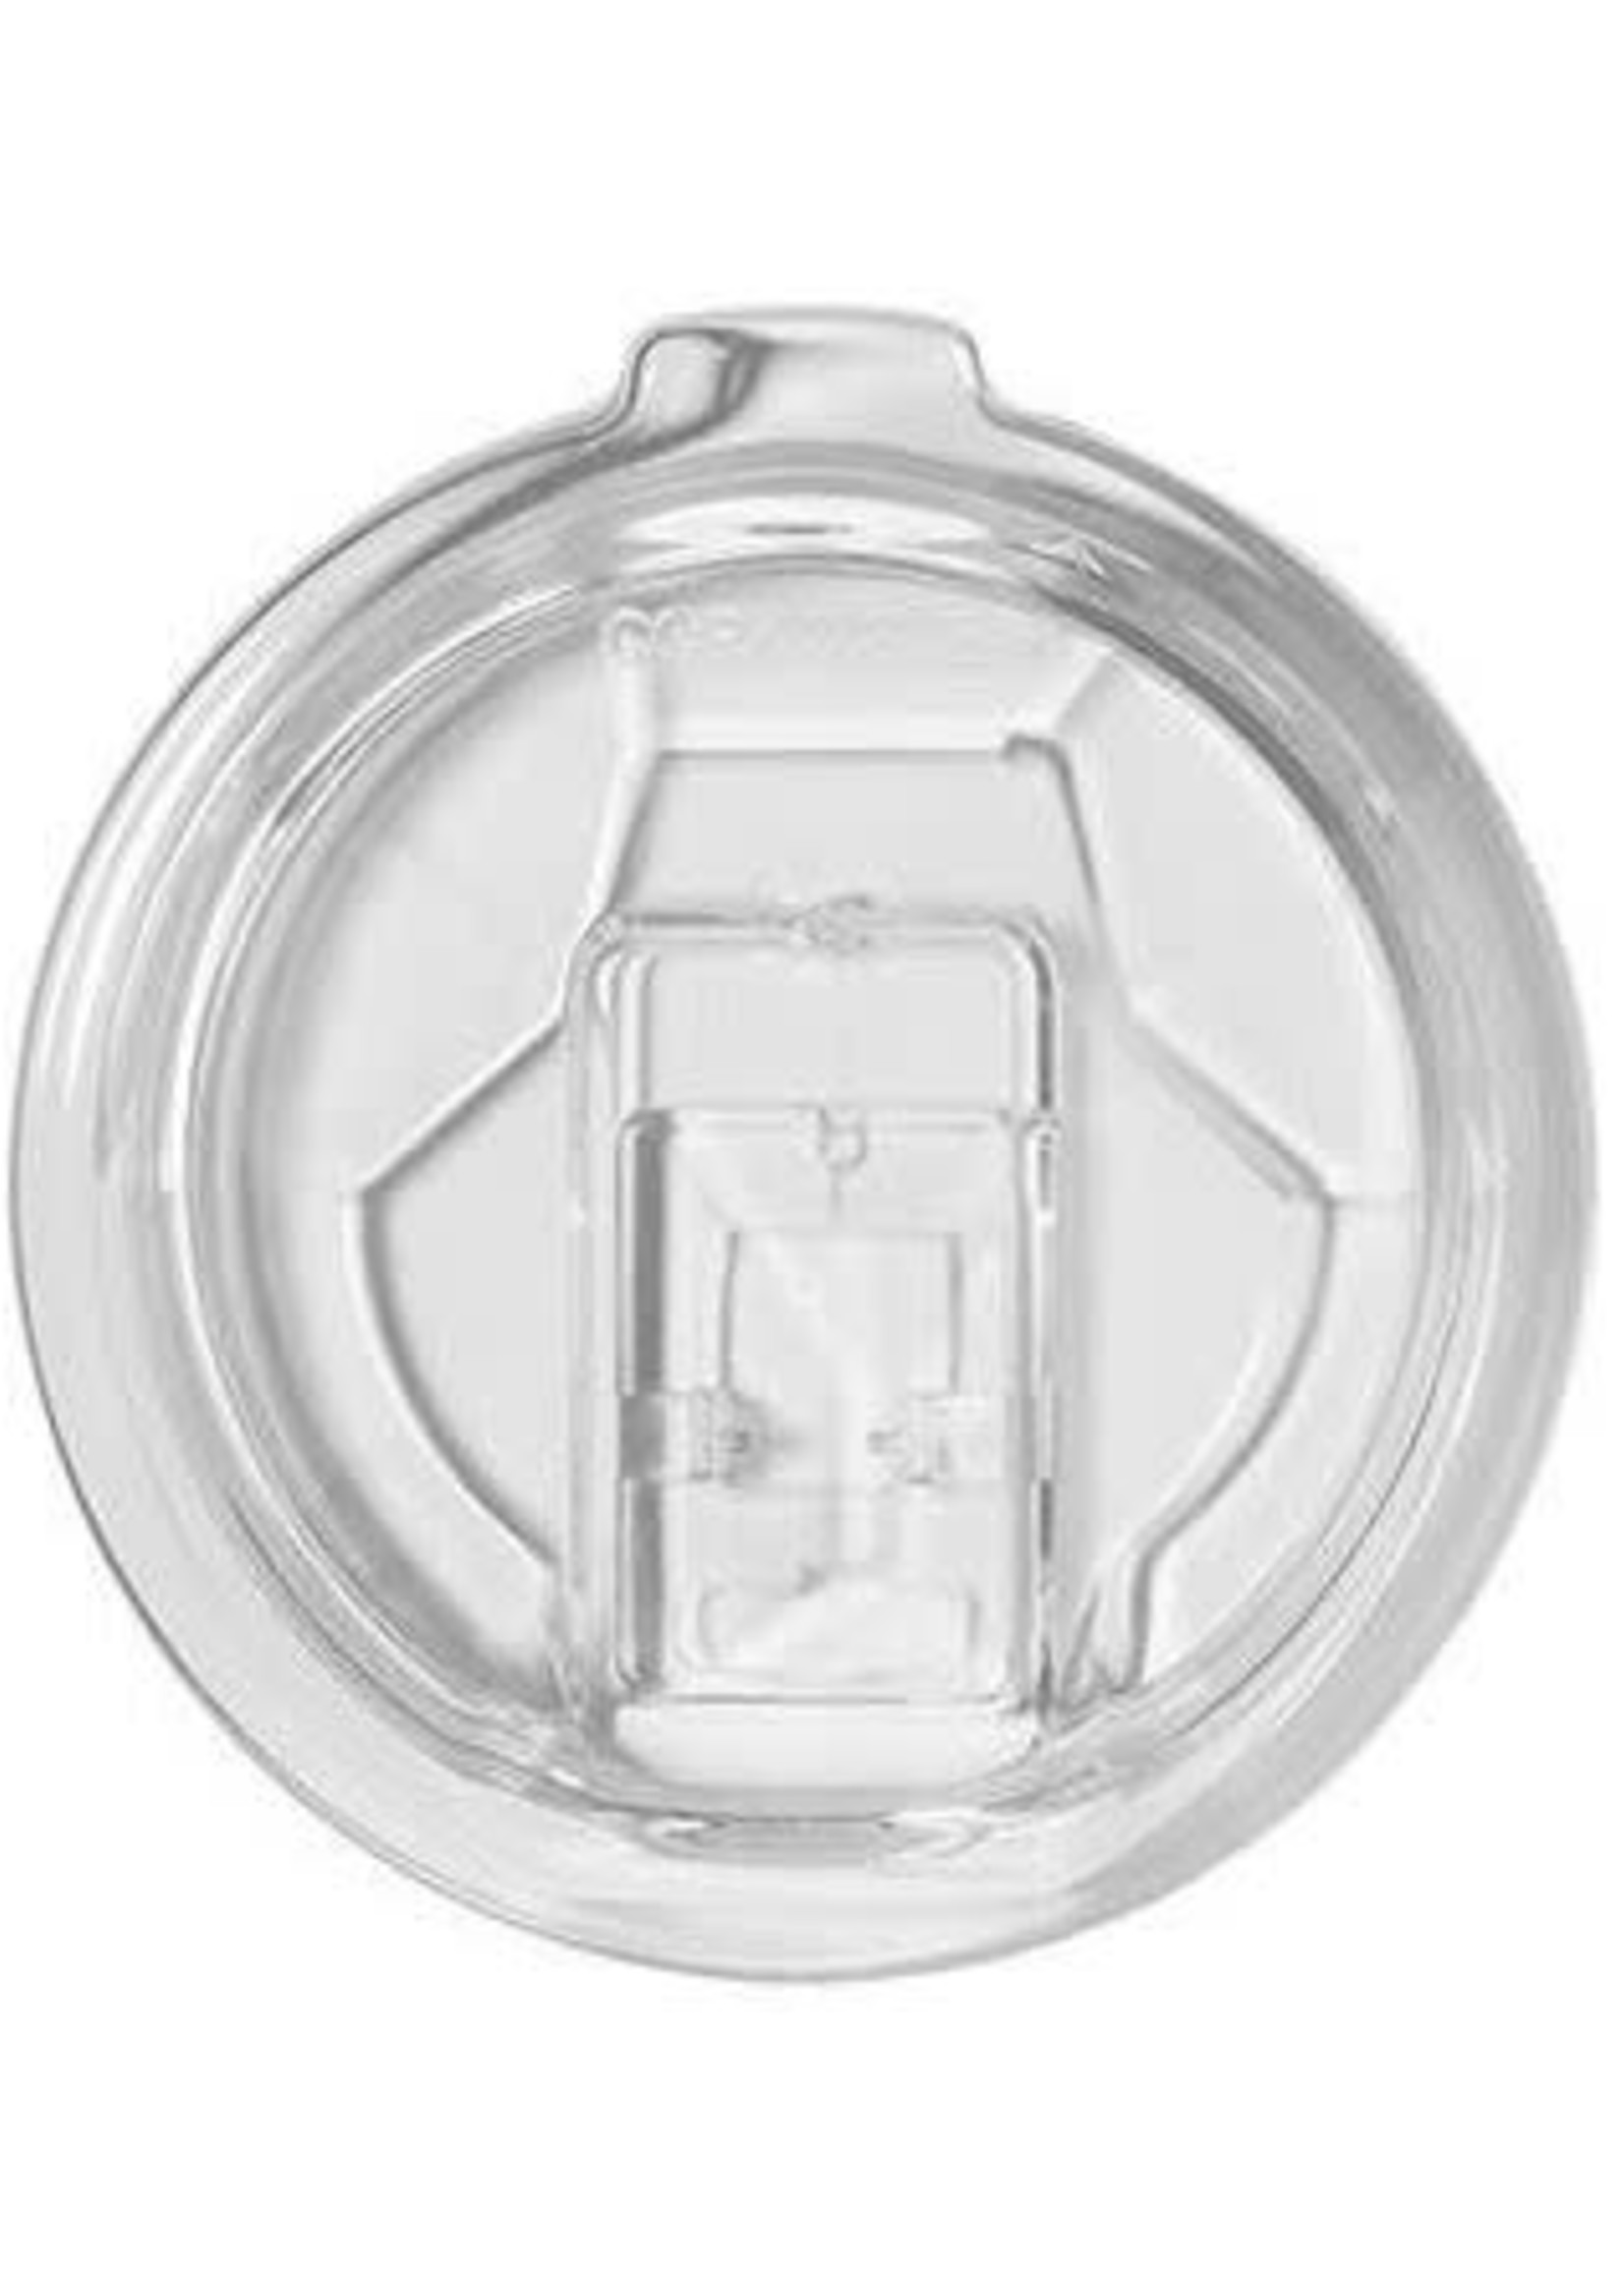 Canteen Cap with Straw - Fits 9oz, 16oz, and 25oz